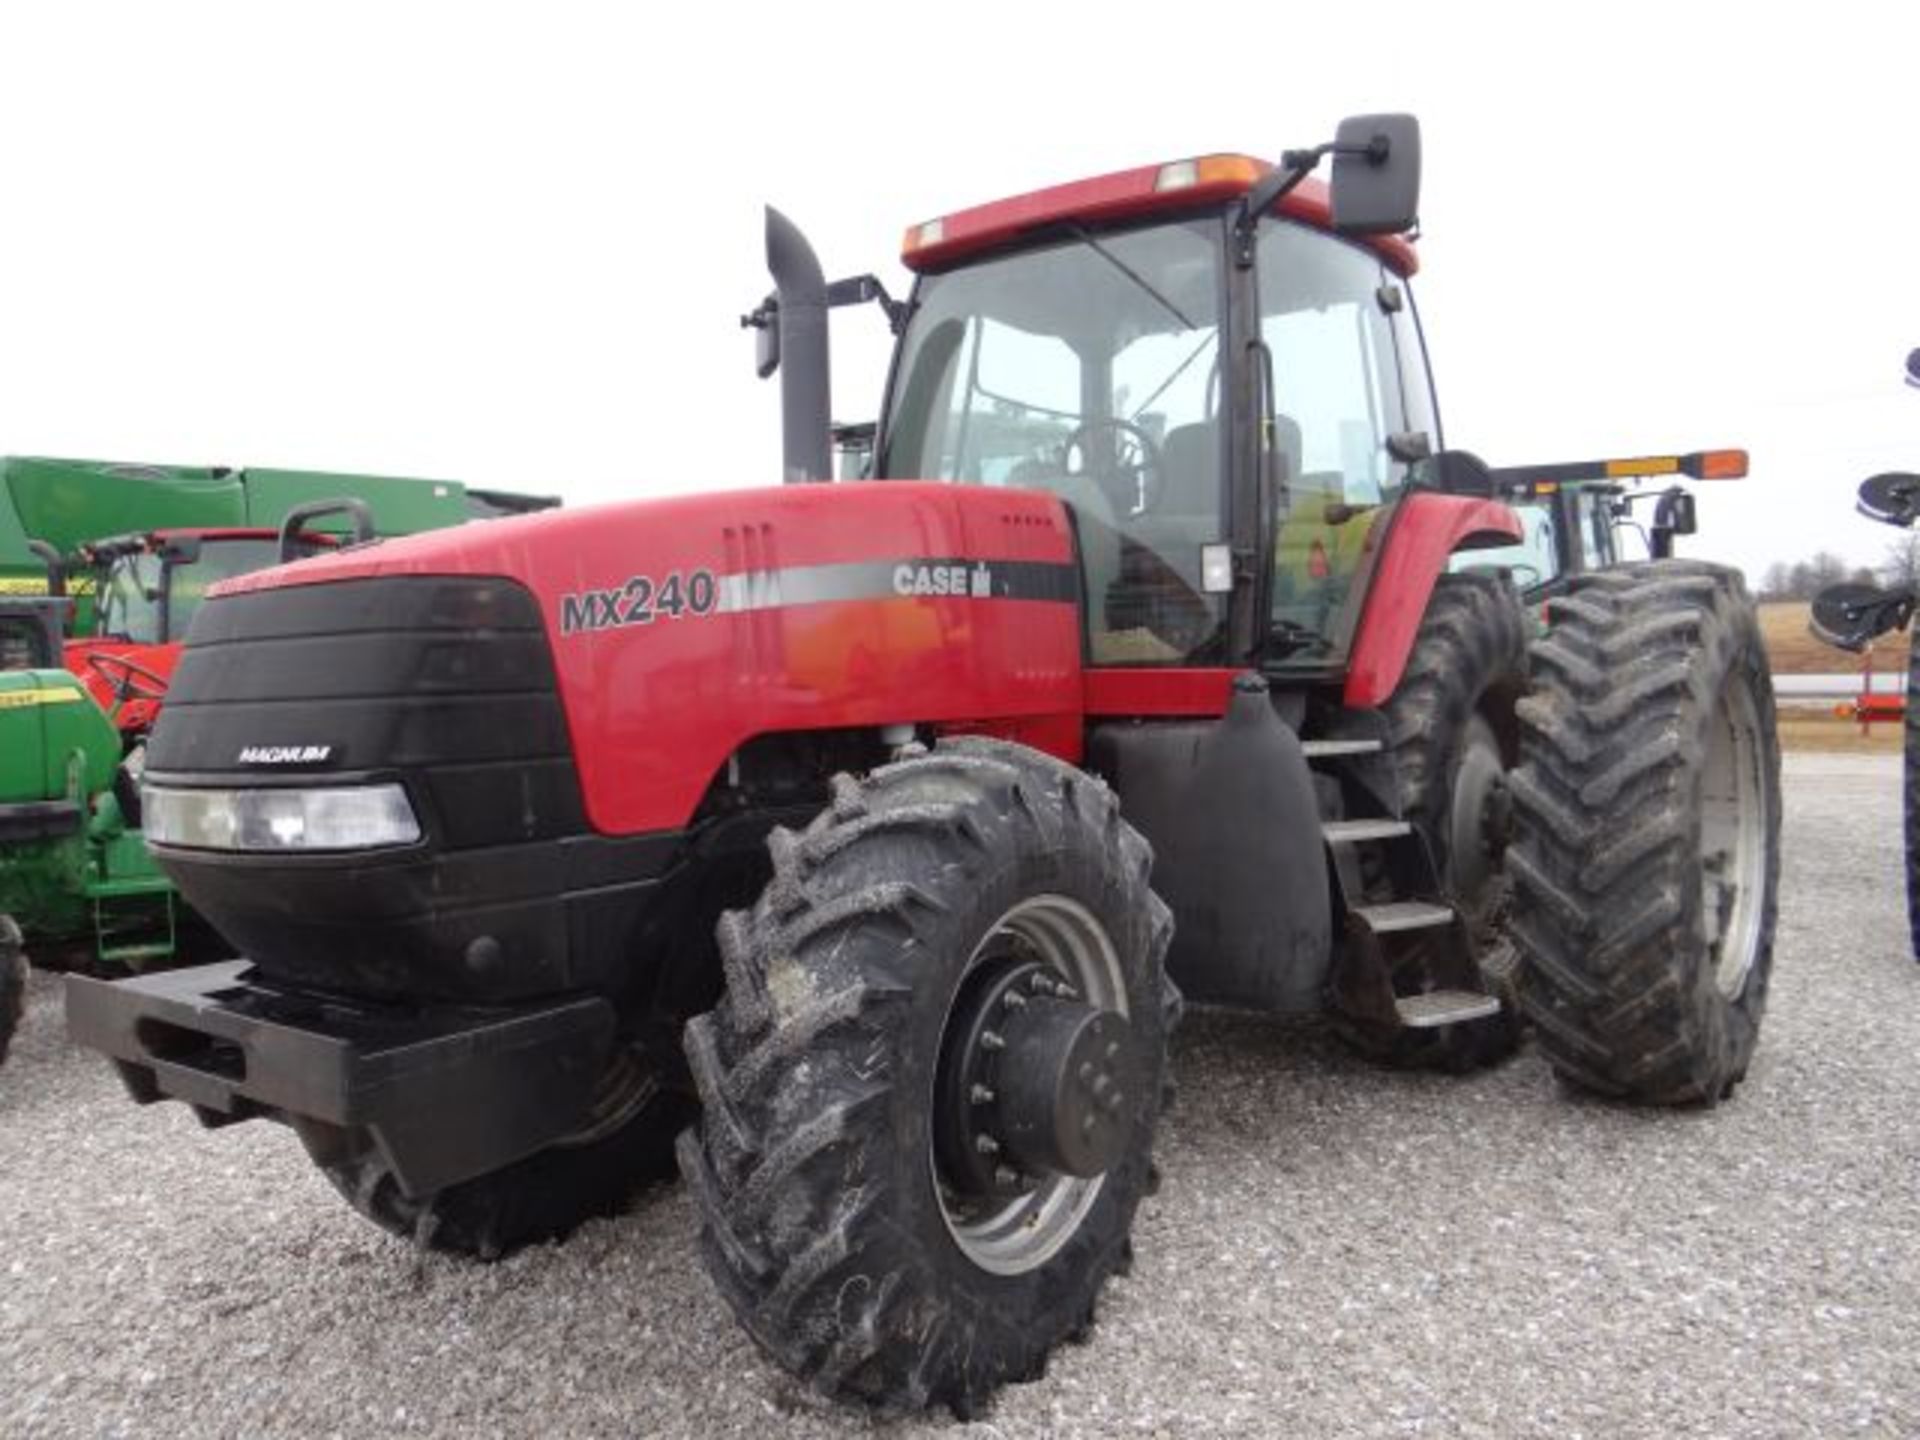 Case IH MX240 Tractor, 2001 6312 hrs, MFWD, 1000 PTO, 4 SCVs, 2000 hrs on Factory Reman Eng, 1500